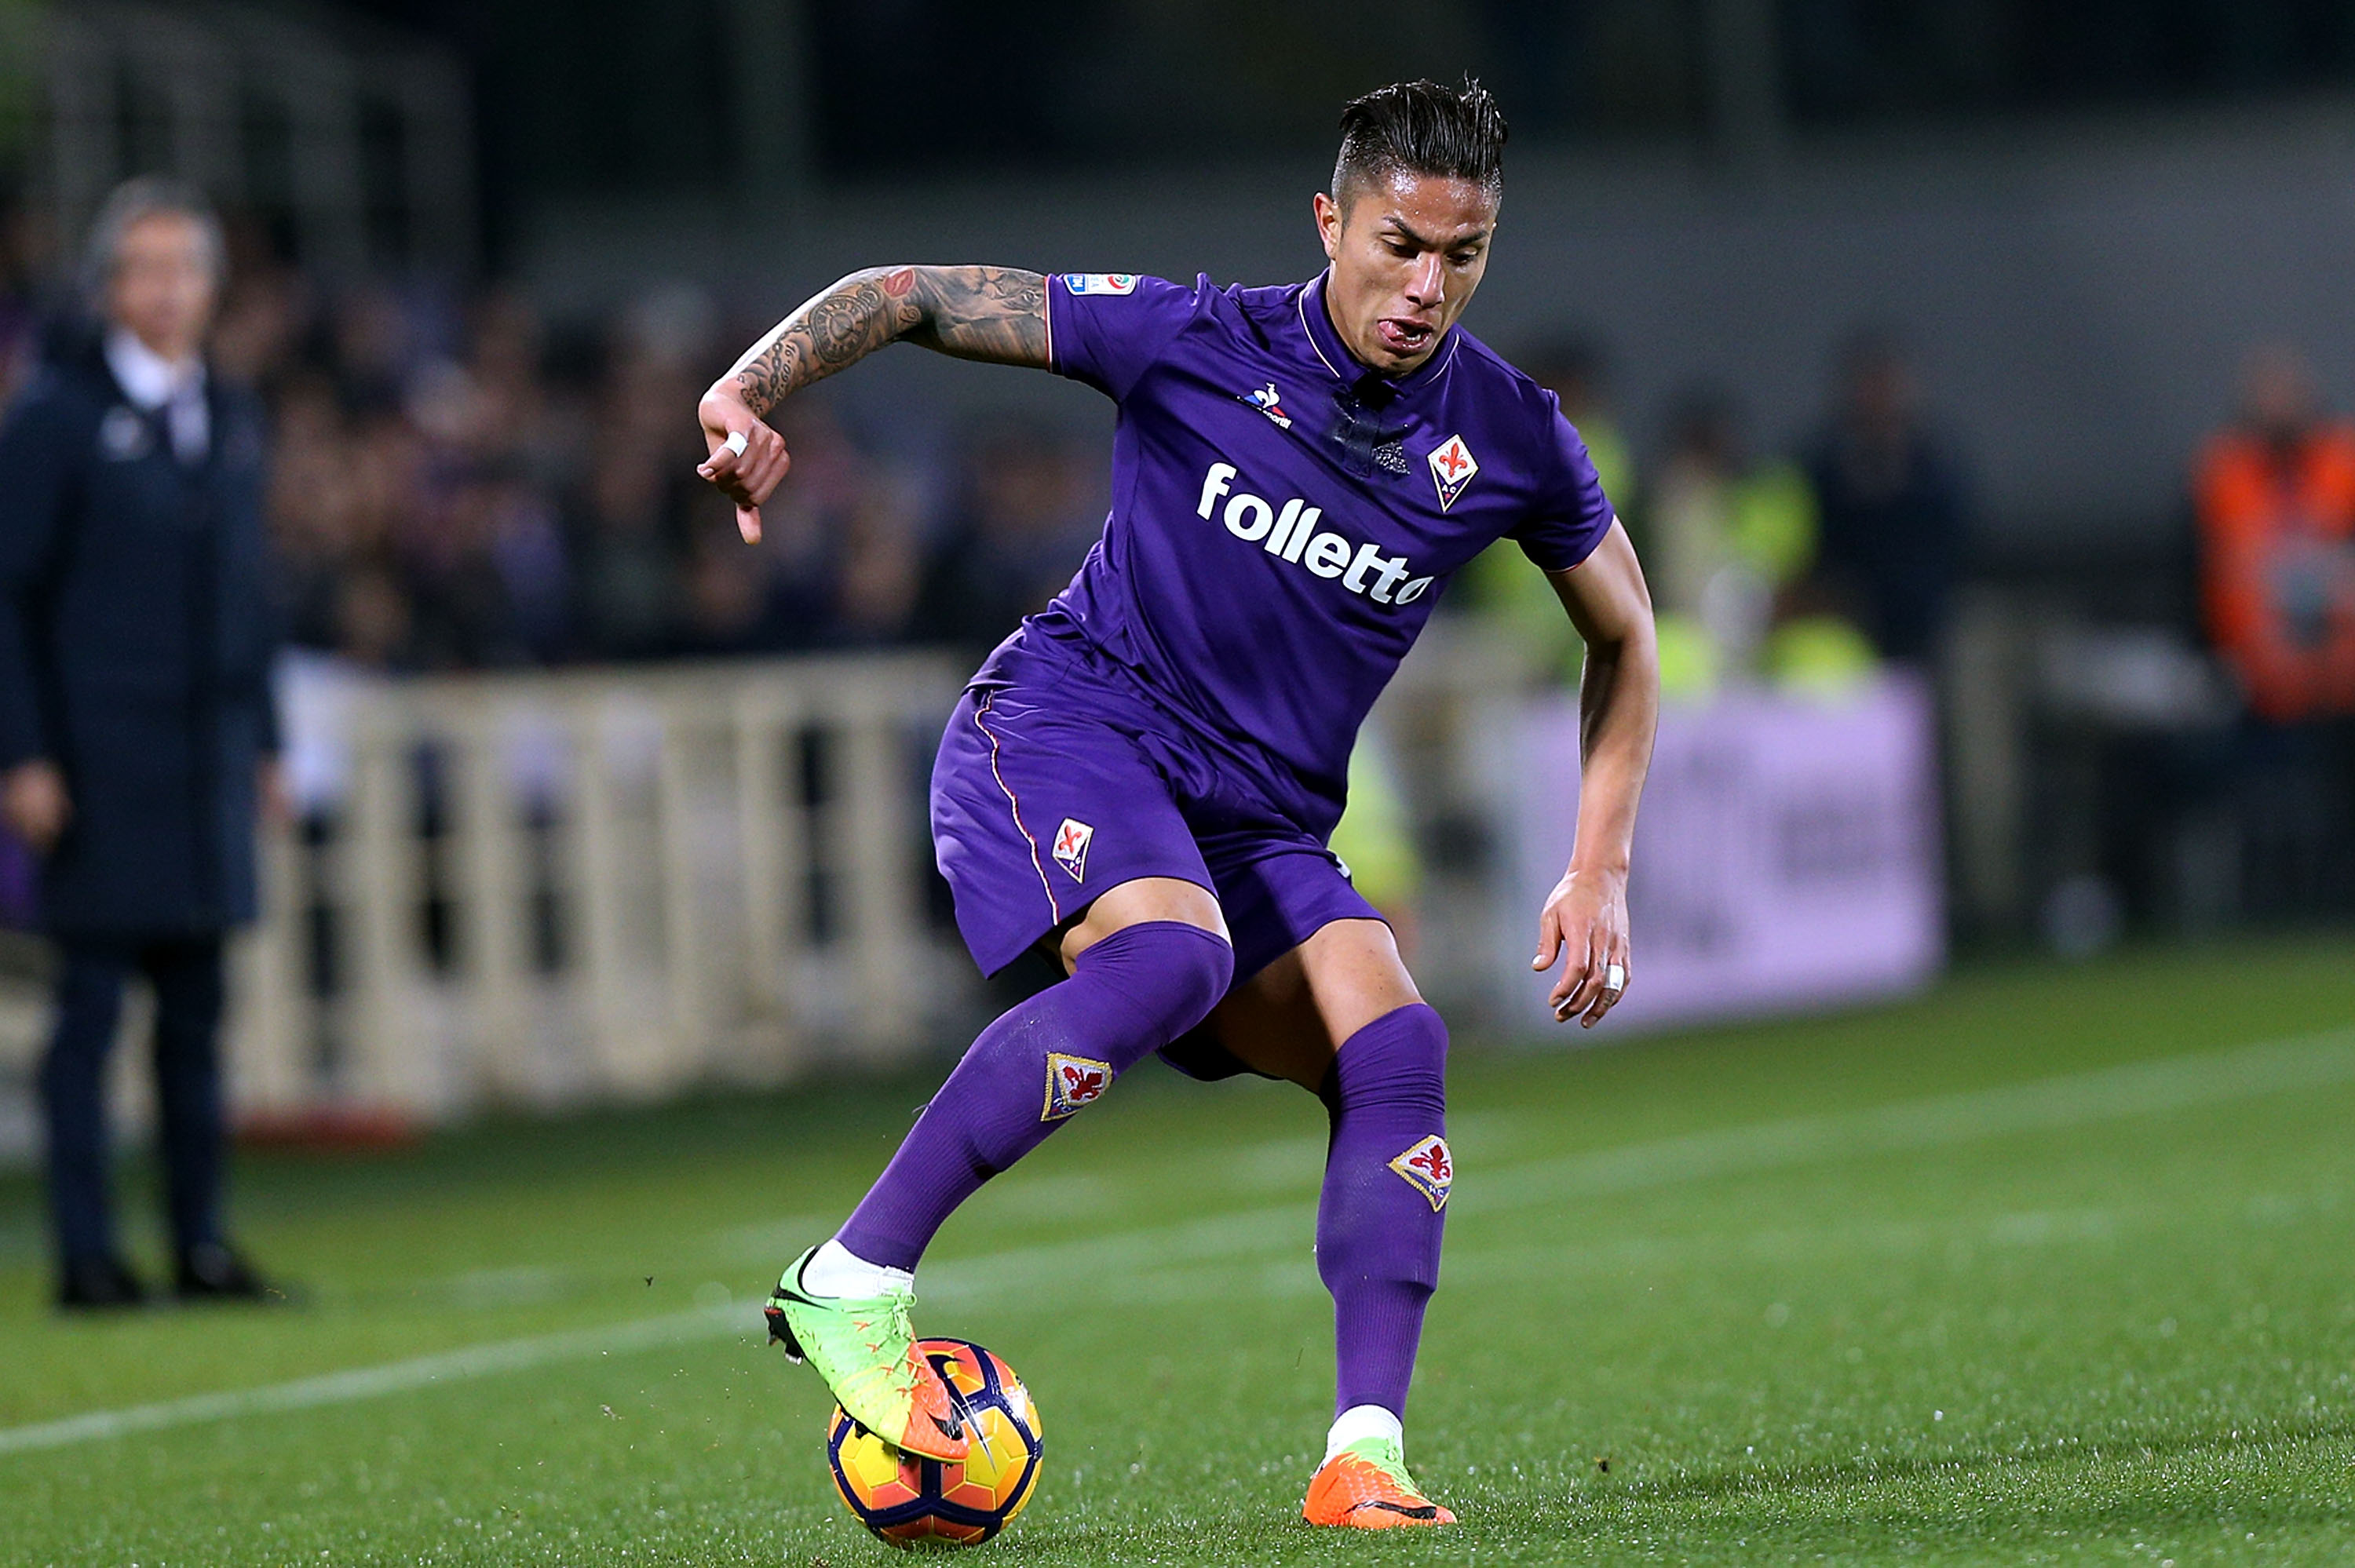 Fiorentina’s Carlos Salcedo: “Important to work in order to be ready”